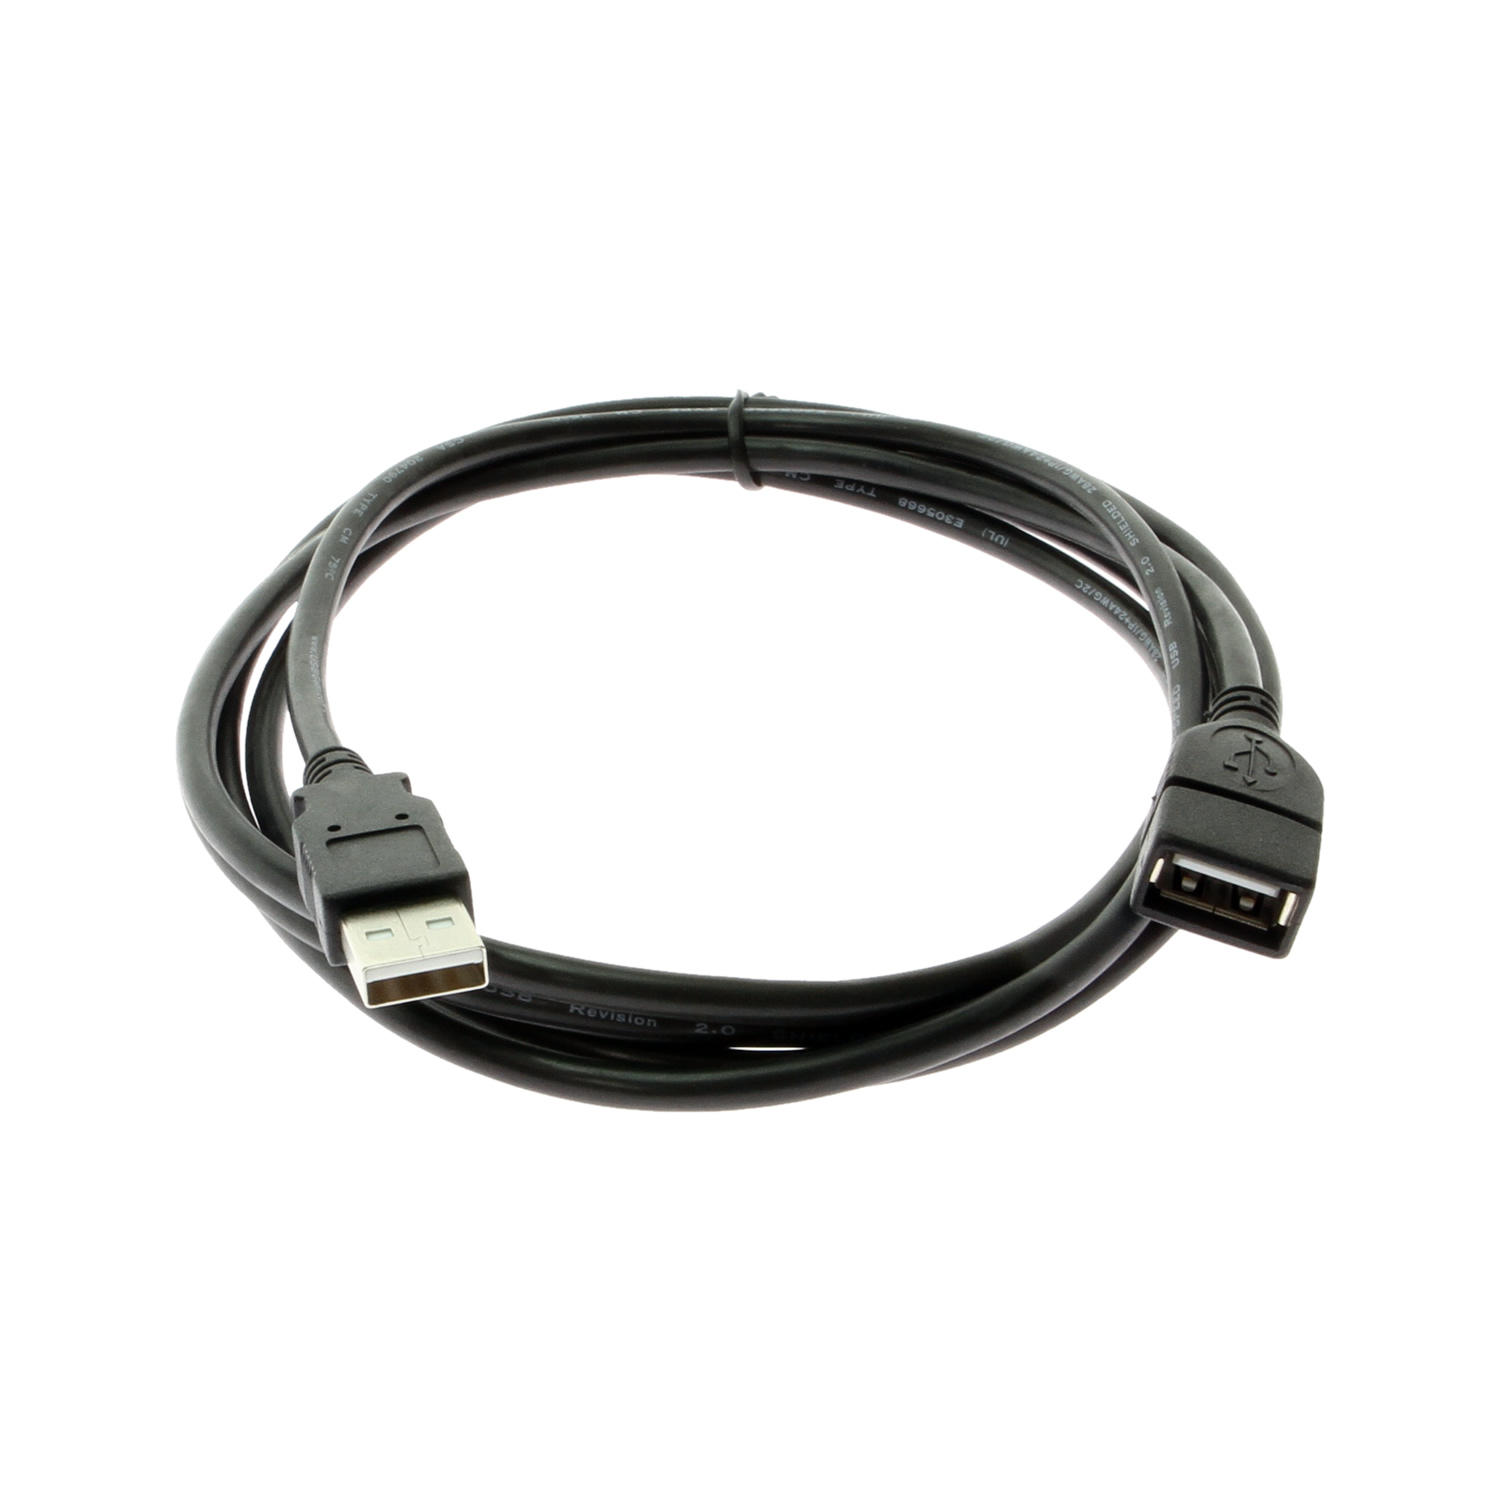 Berri Spænding Paranafloden 28/24 AWG USB 2.0 Hi-Speed A to A Extension Cable 6ft. Black